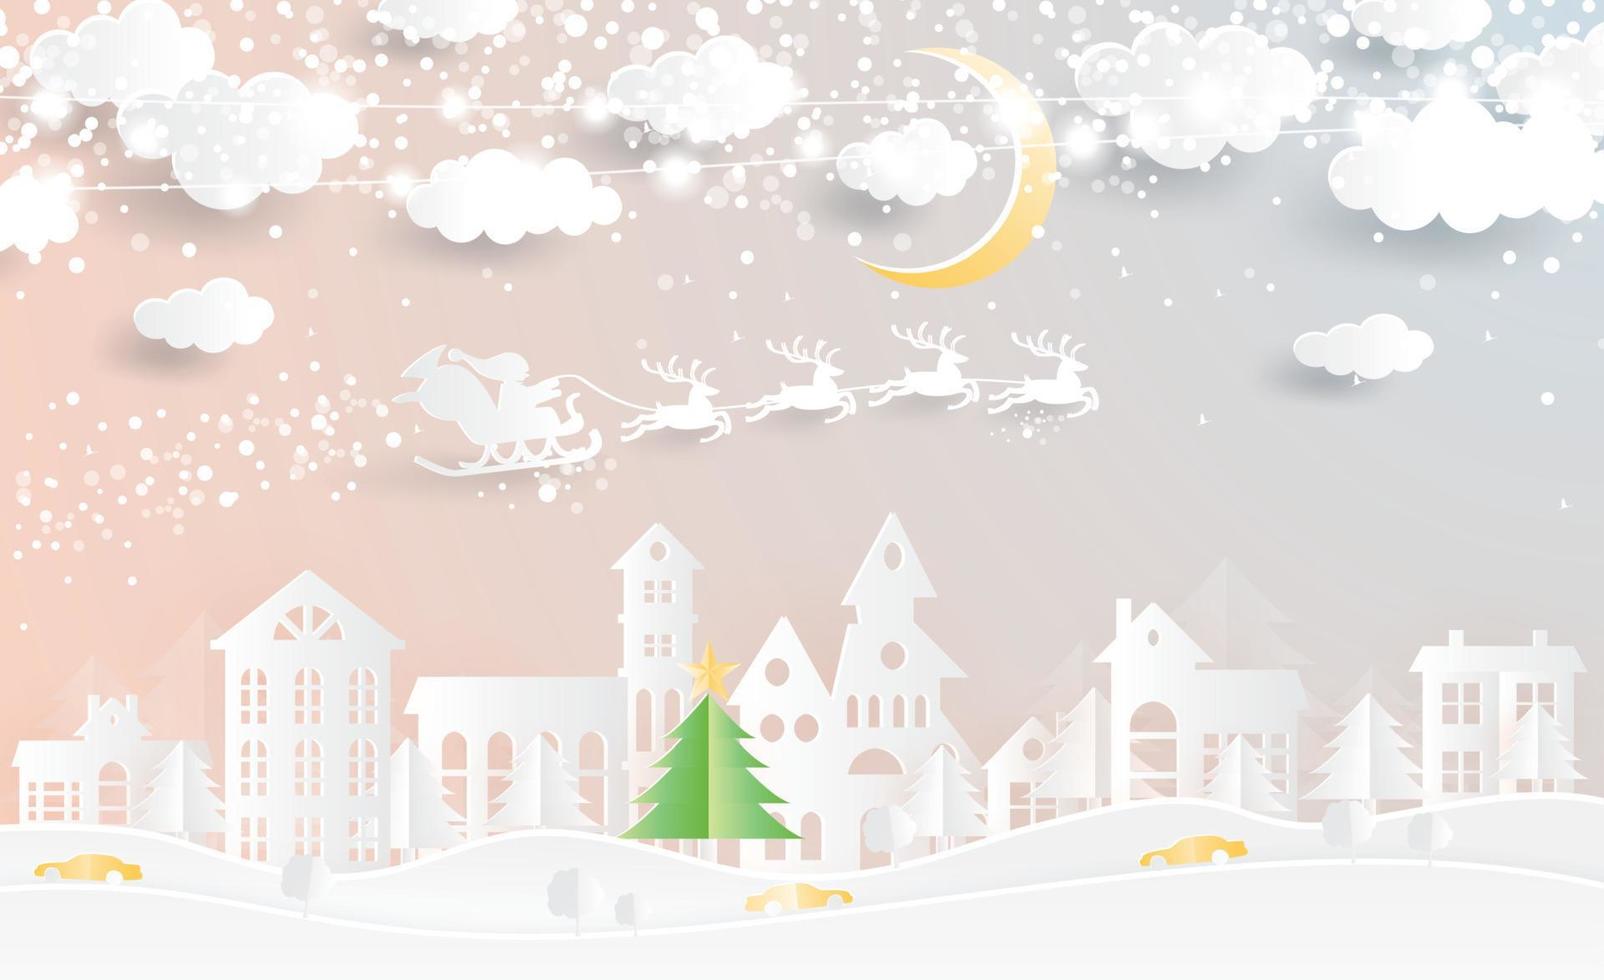 Christmas Village and Santa Claus in Sleigh in Paper Cut Style. vector